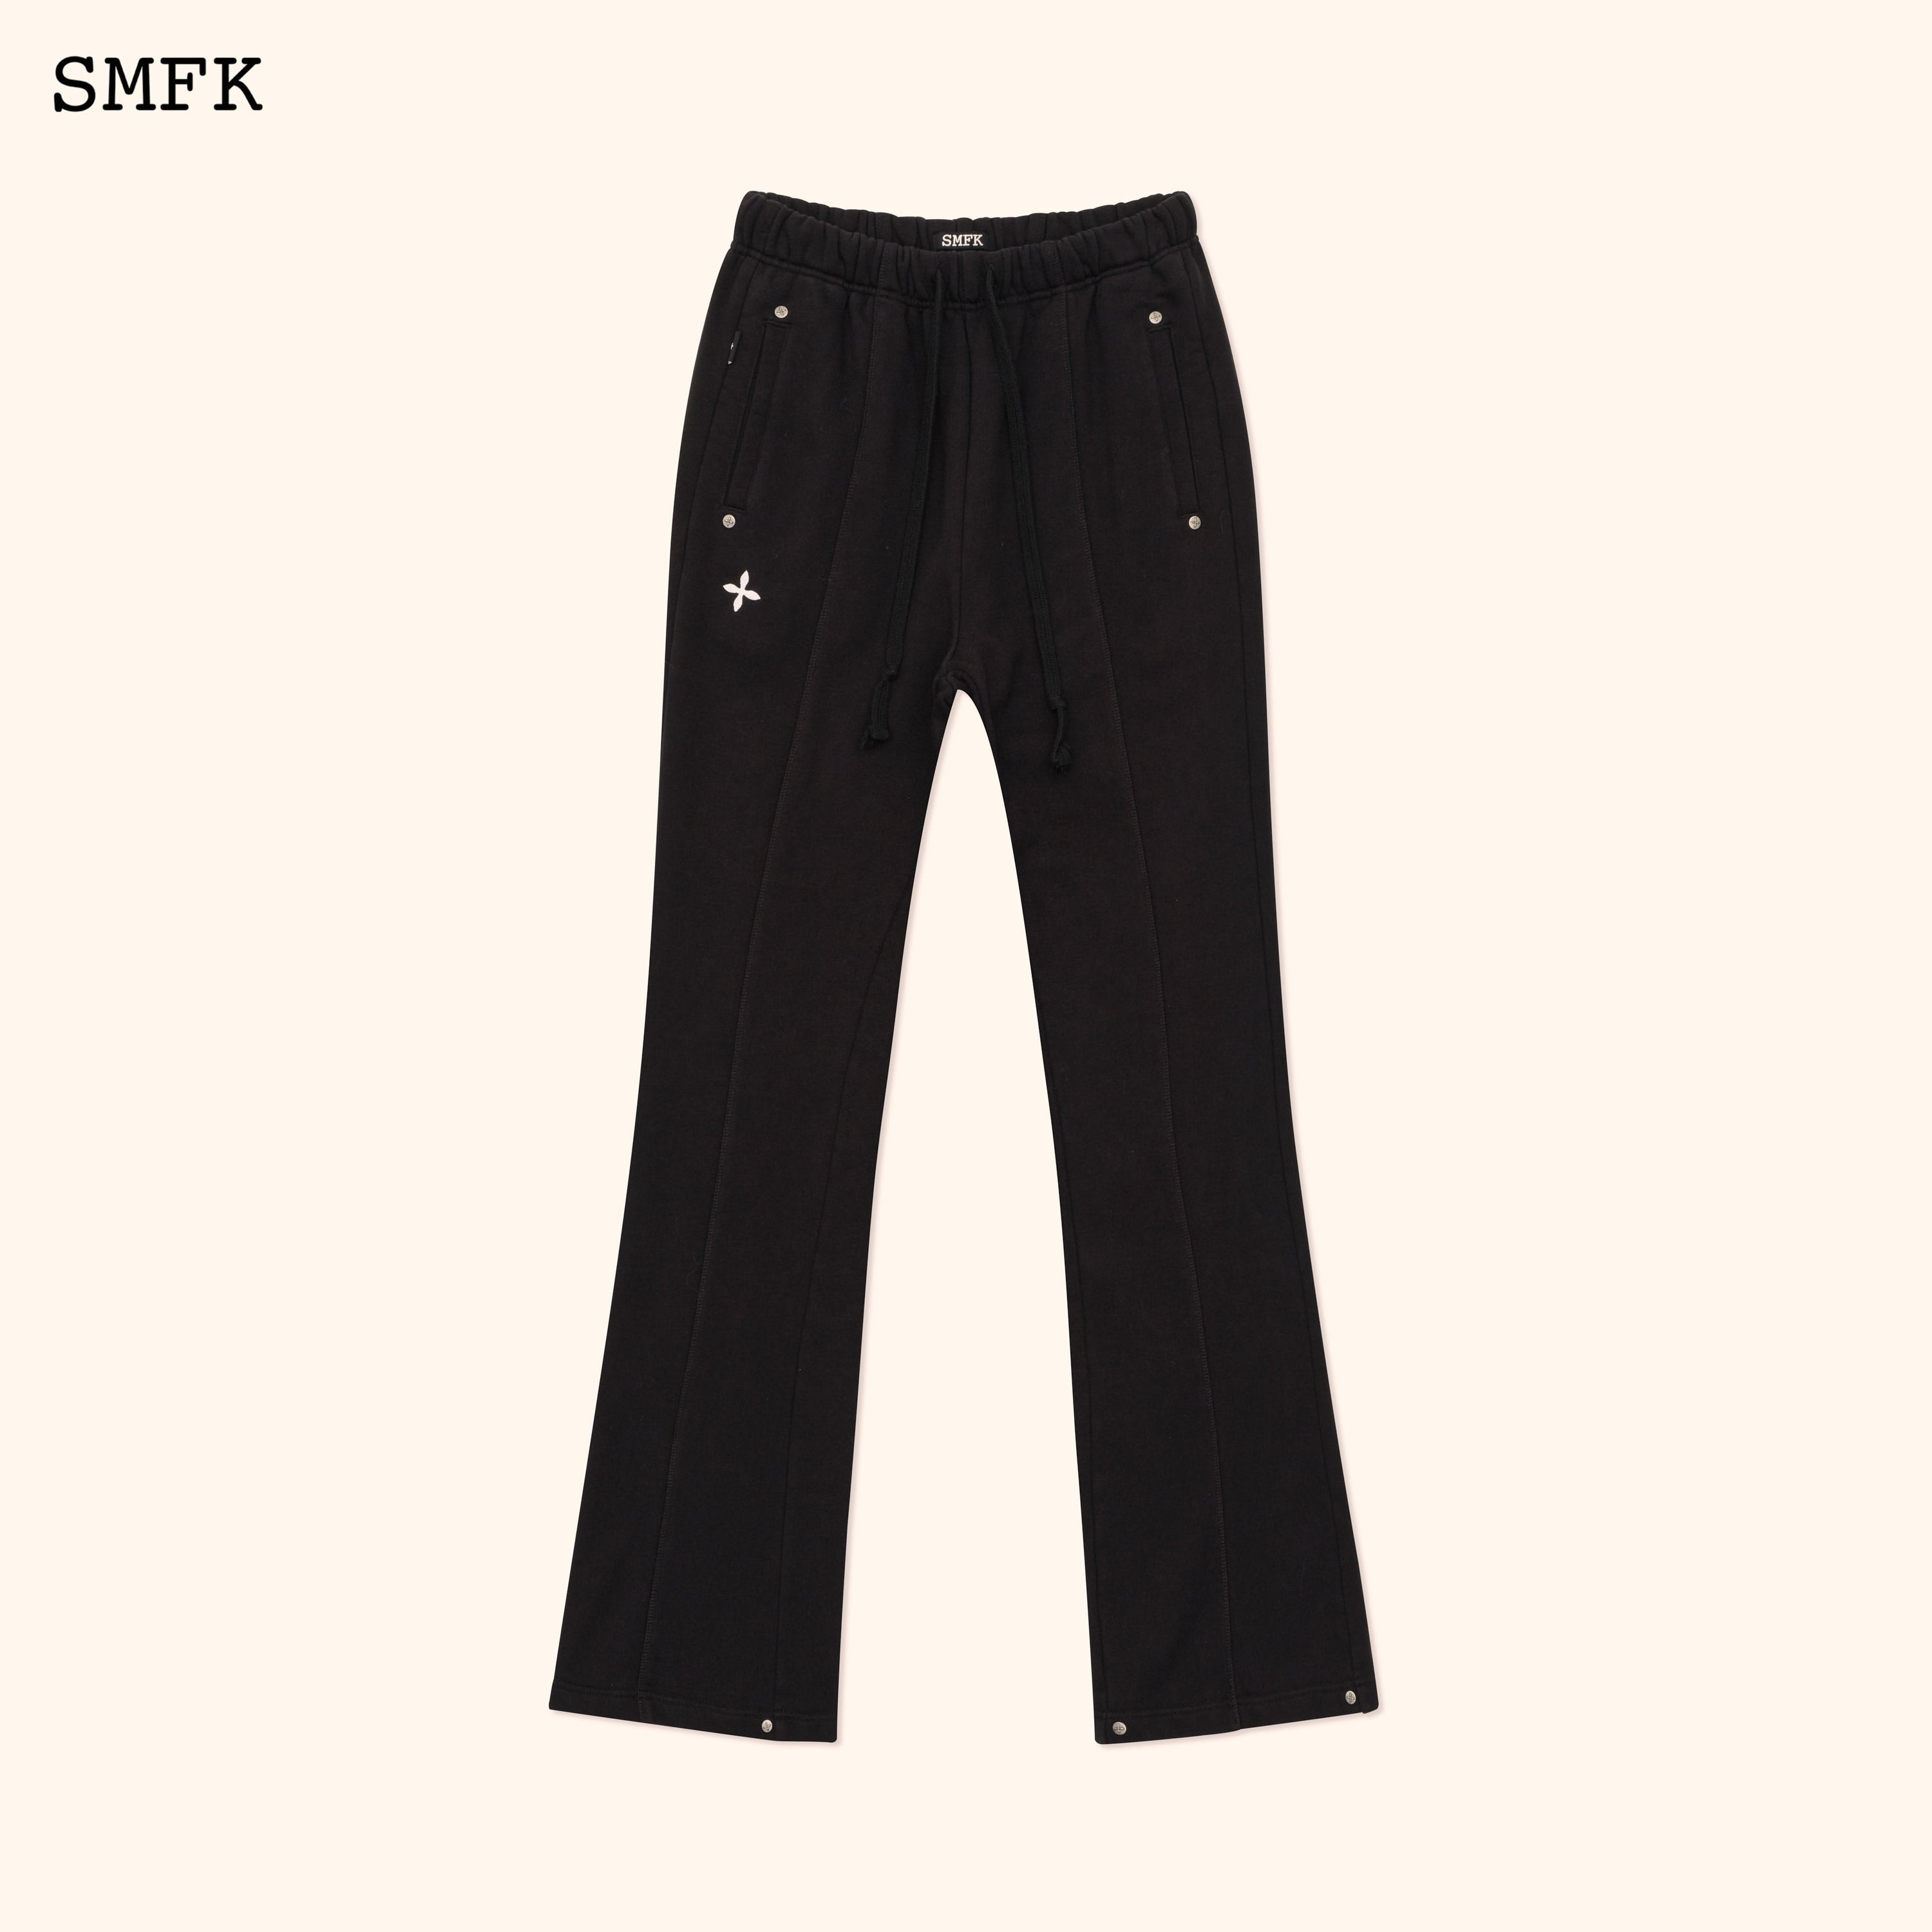 Compass Classic Cross Flared Sweatpants In Black - SMFK Official